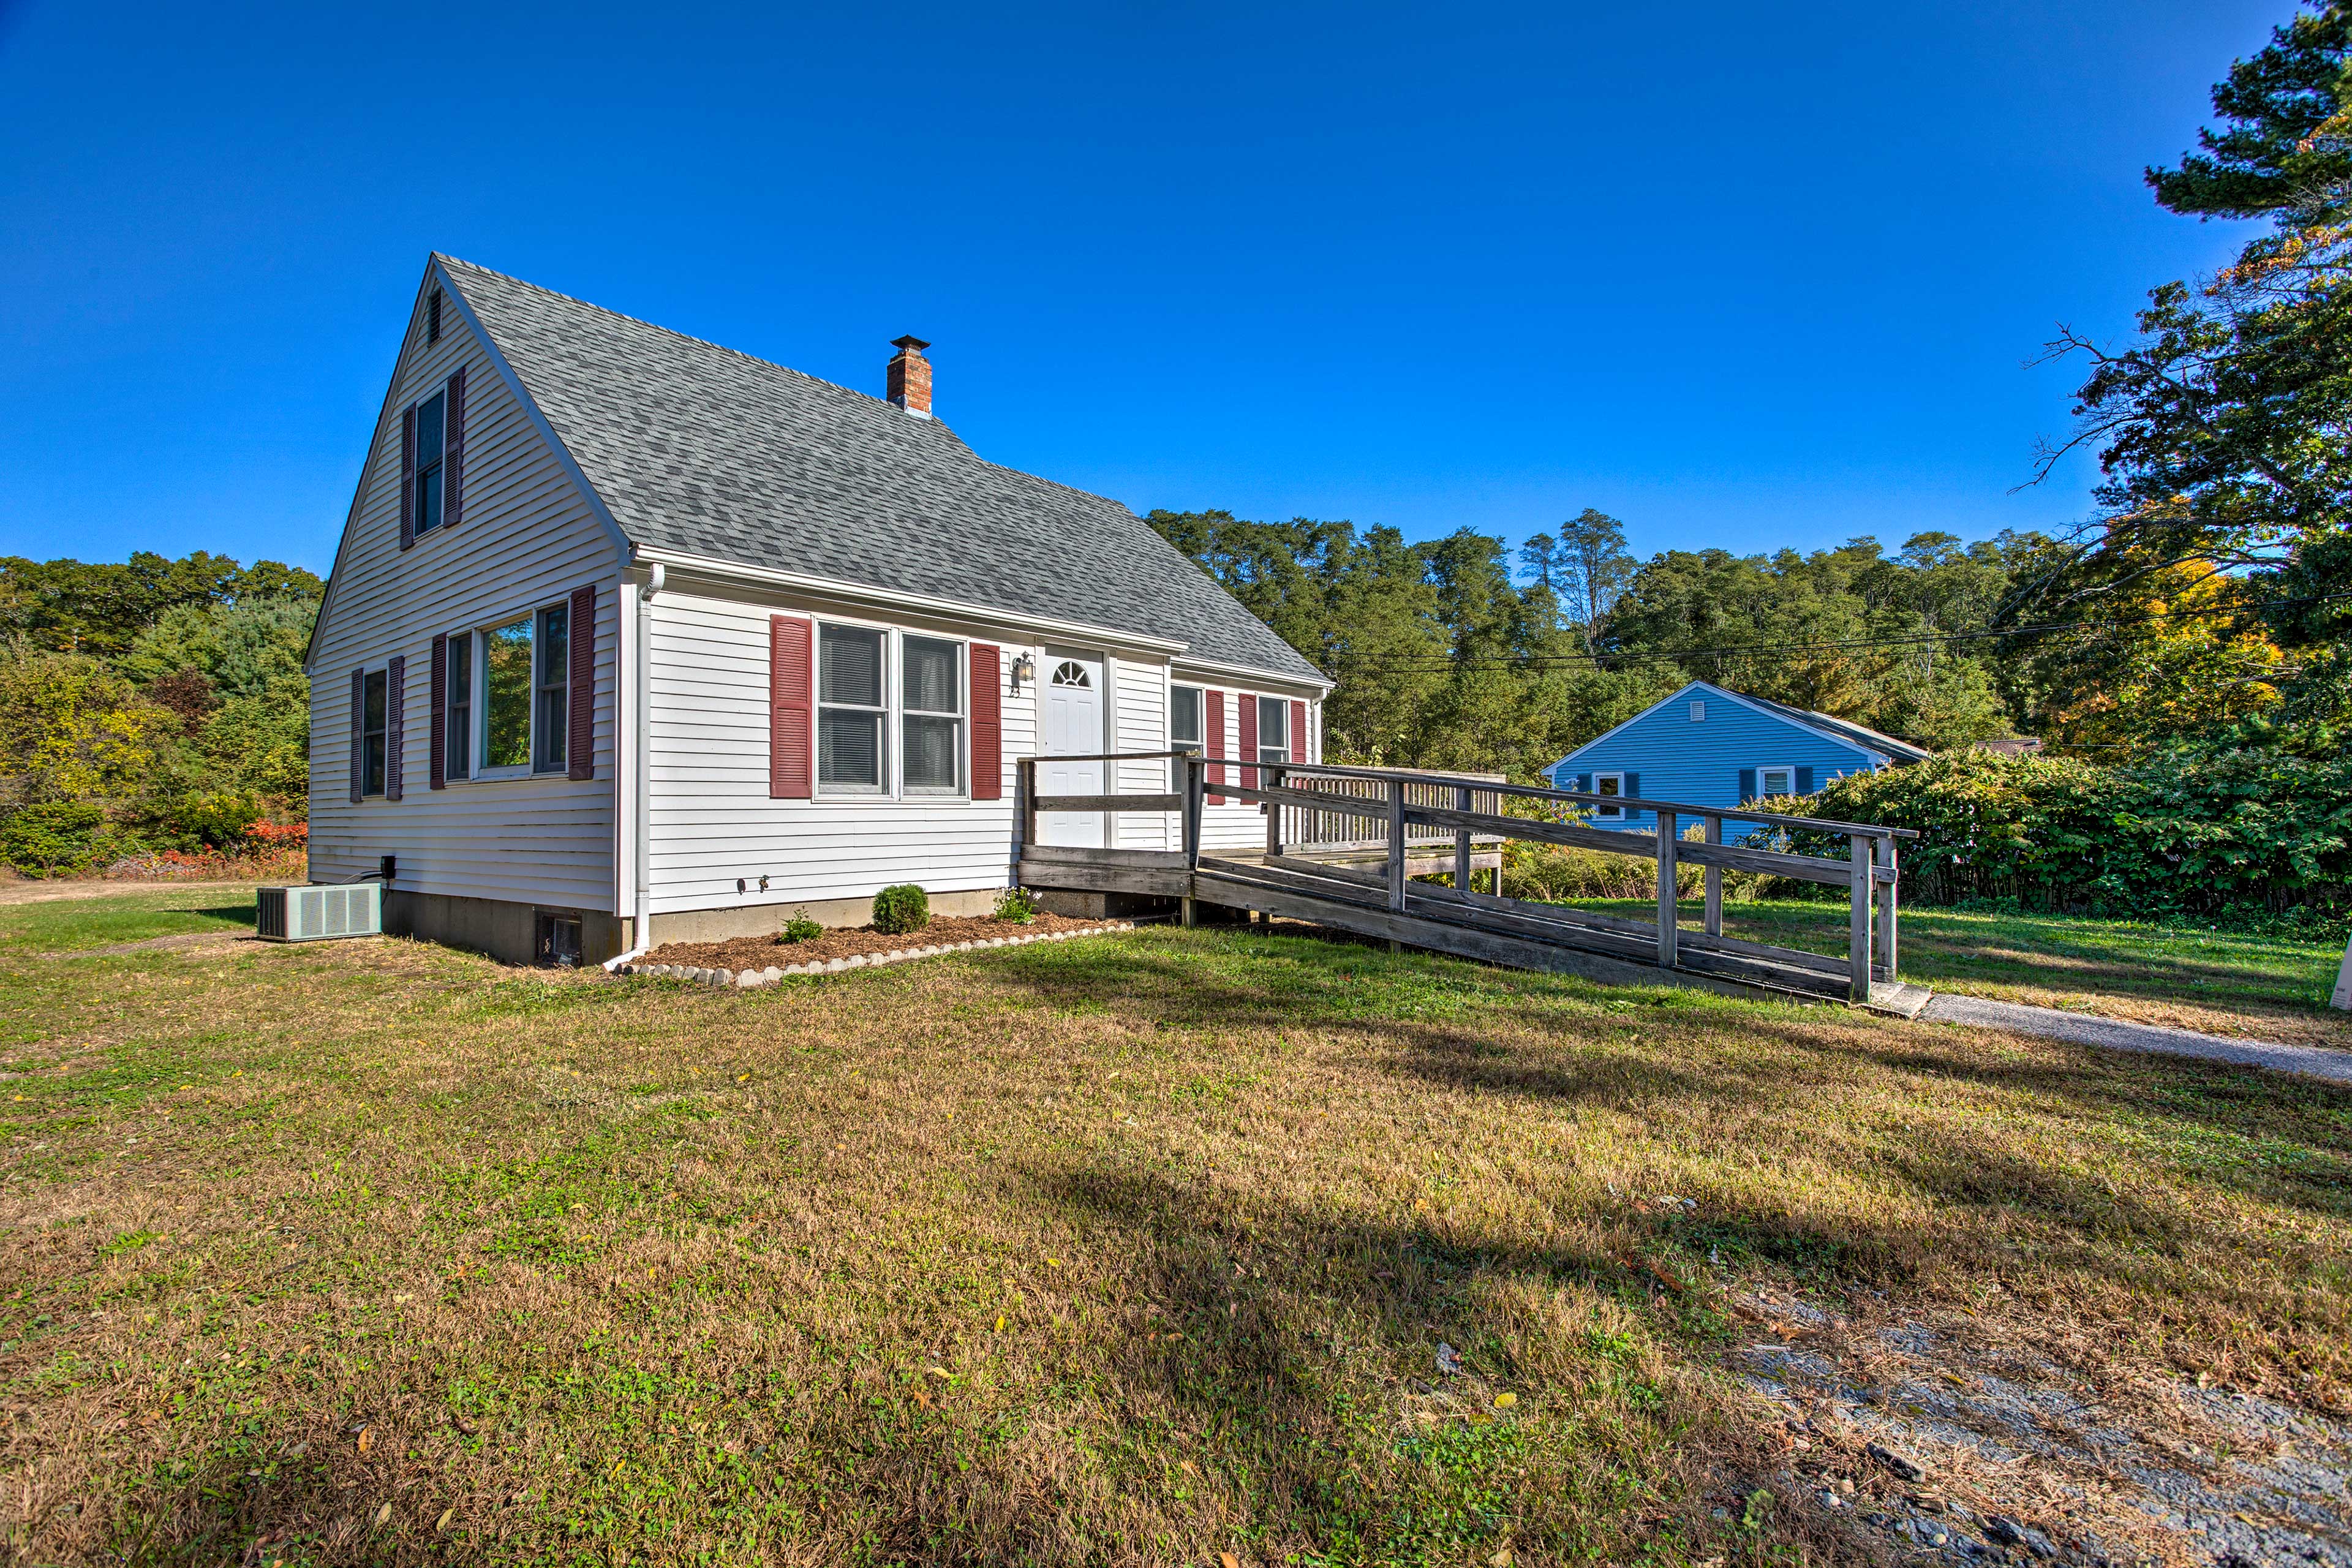 Updated Plymouth Home < 2 Miles to Waterfront!